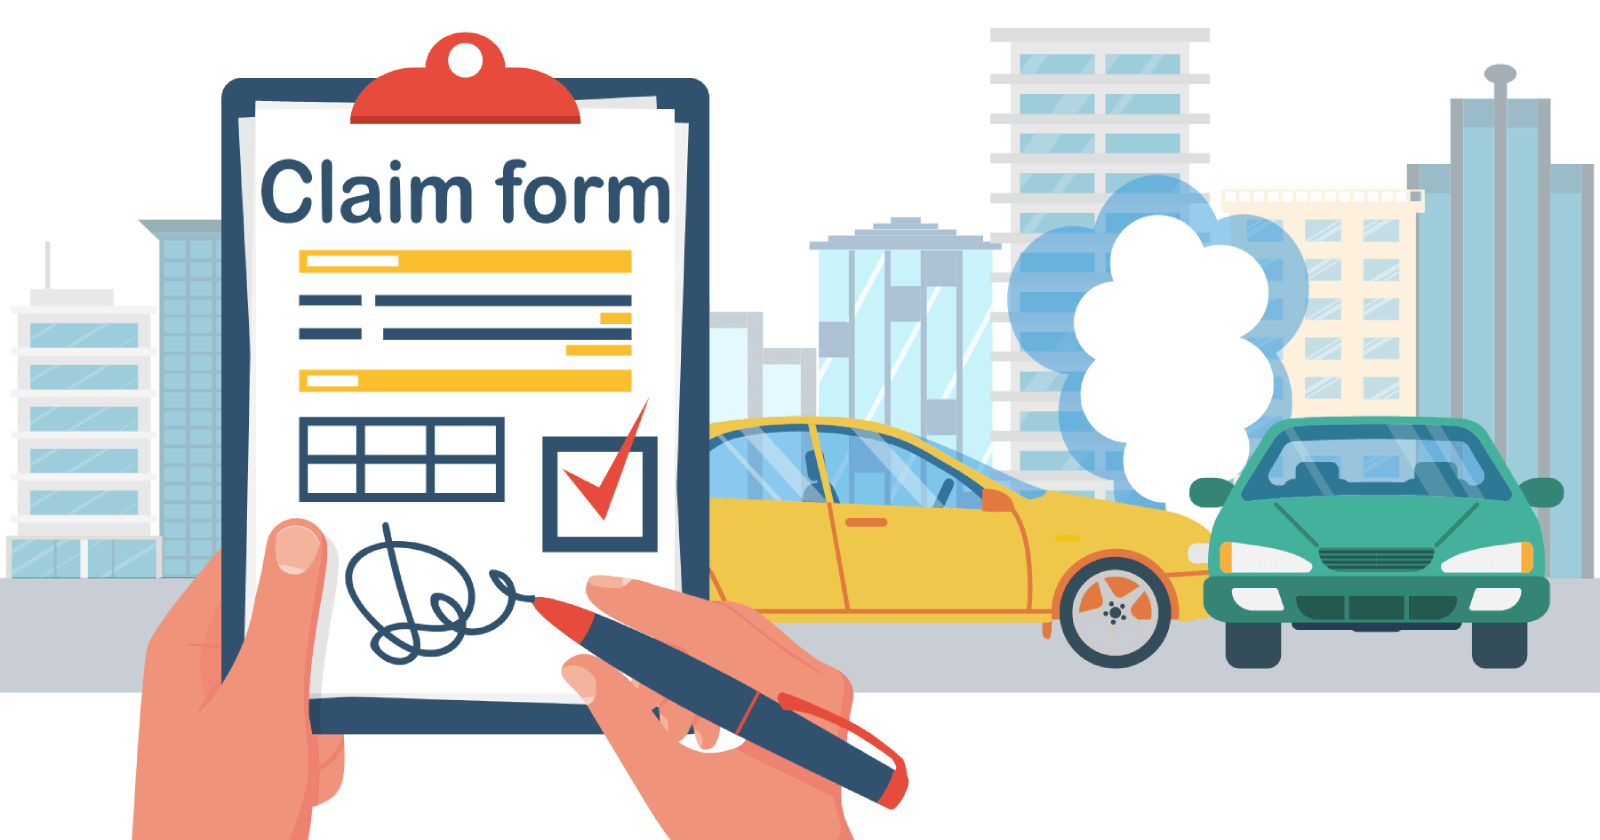 Does ACKO Really Settle Claims? All You Need To Know About ACKO’s Motor Insurance Claim Process